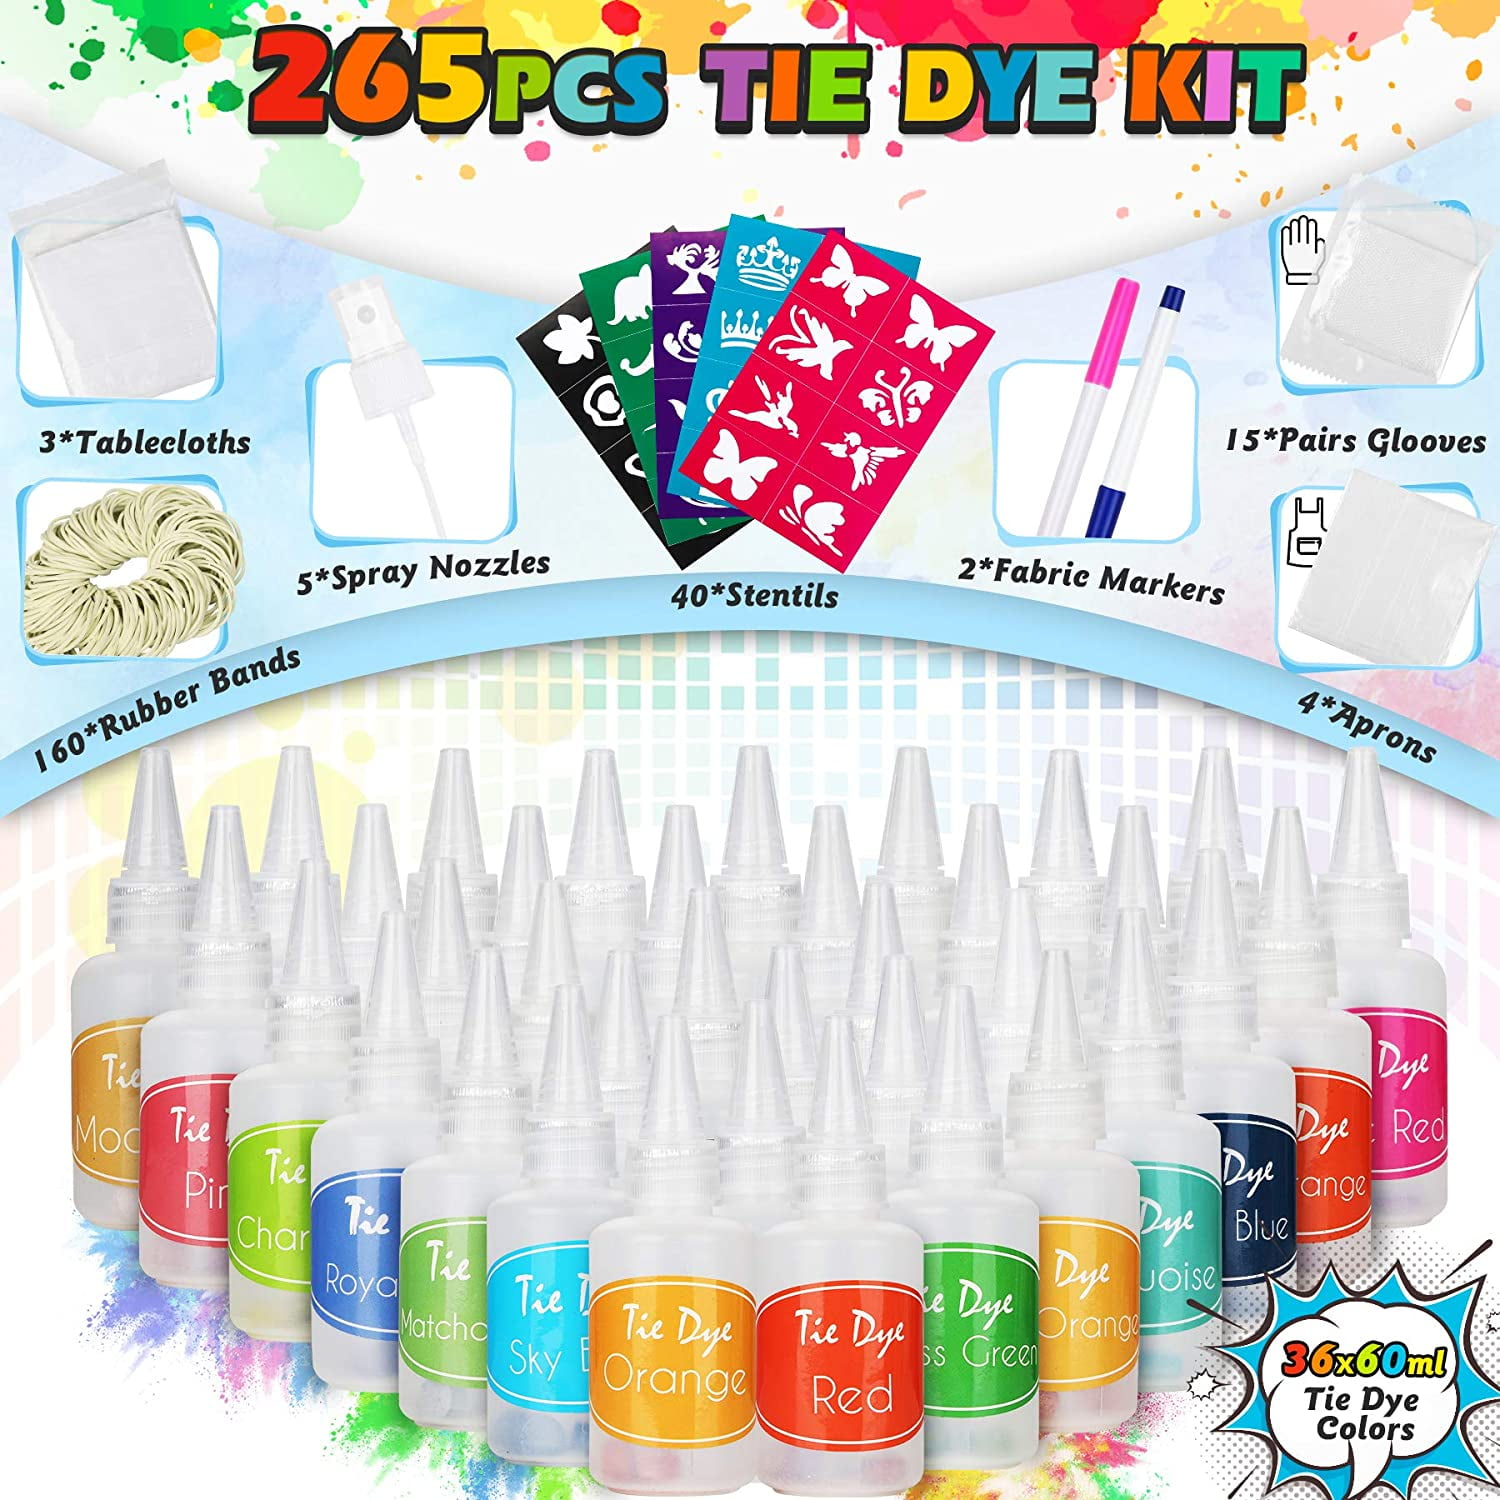 lenbest Tie Dye Kit, Tie-Dye Kits for Dyeing Fabric, Fashion DIY Clothes Fabric Textile Paints Set, Creative Art Craft for Kids & Adults (20 Colo